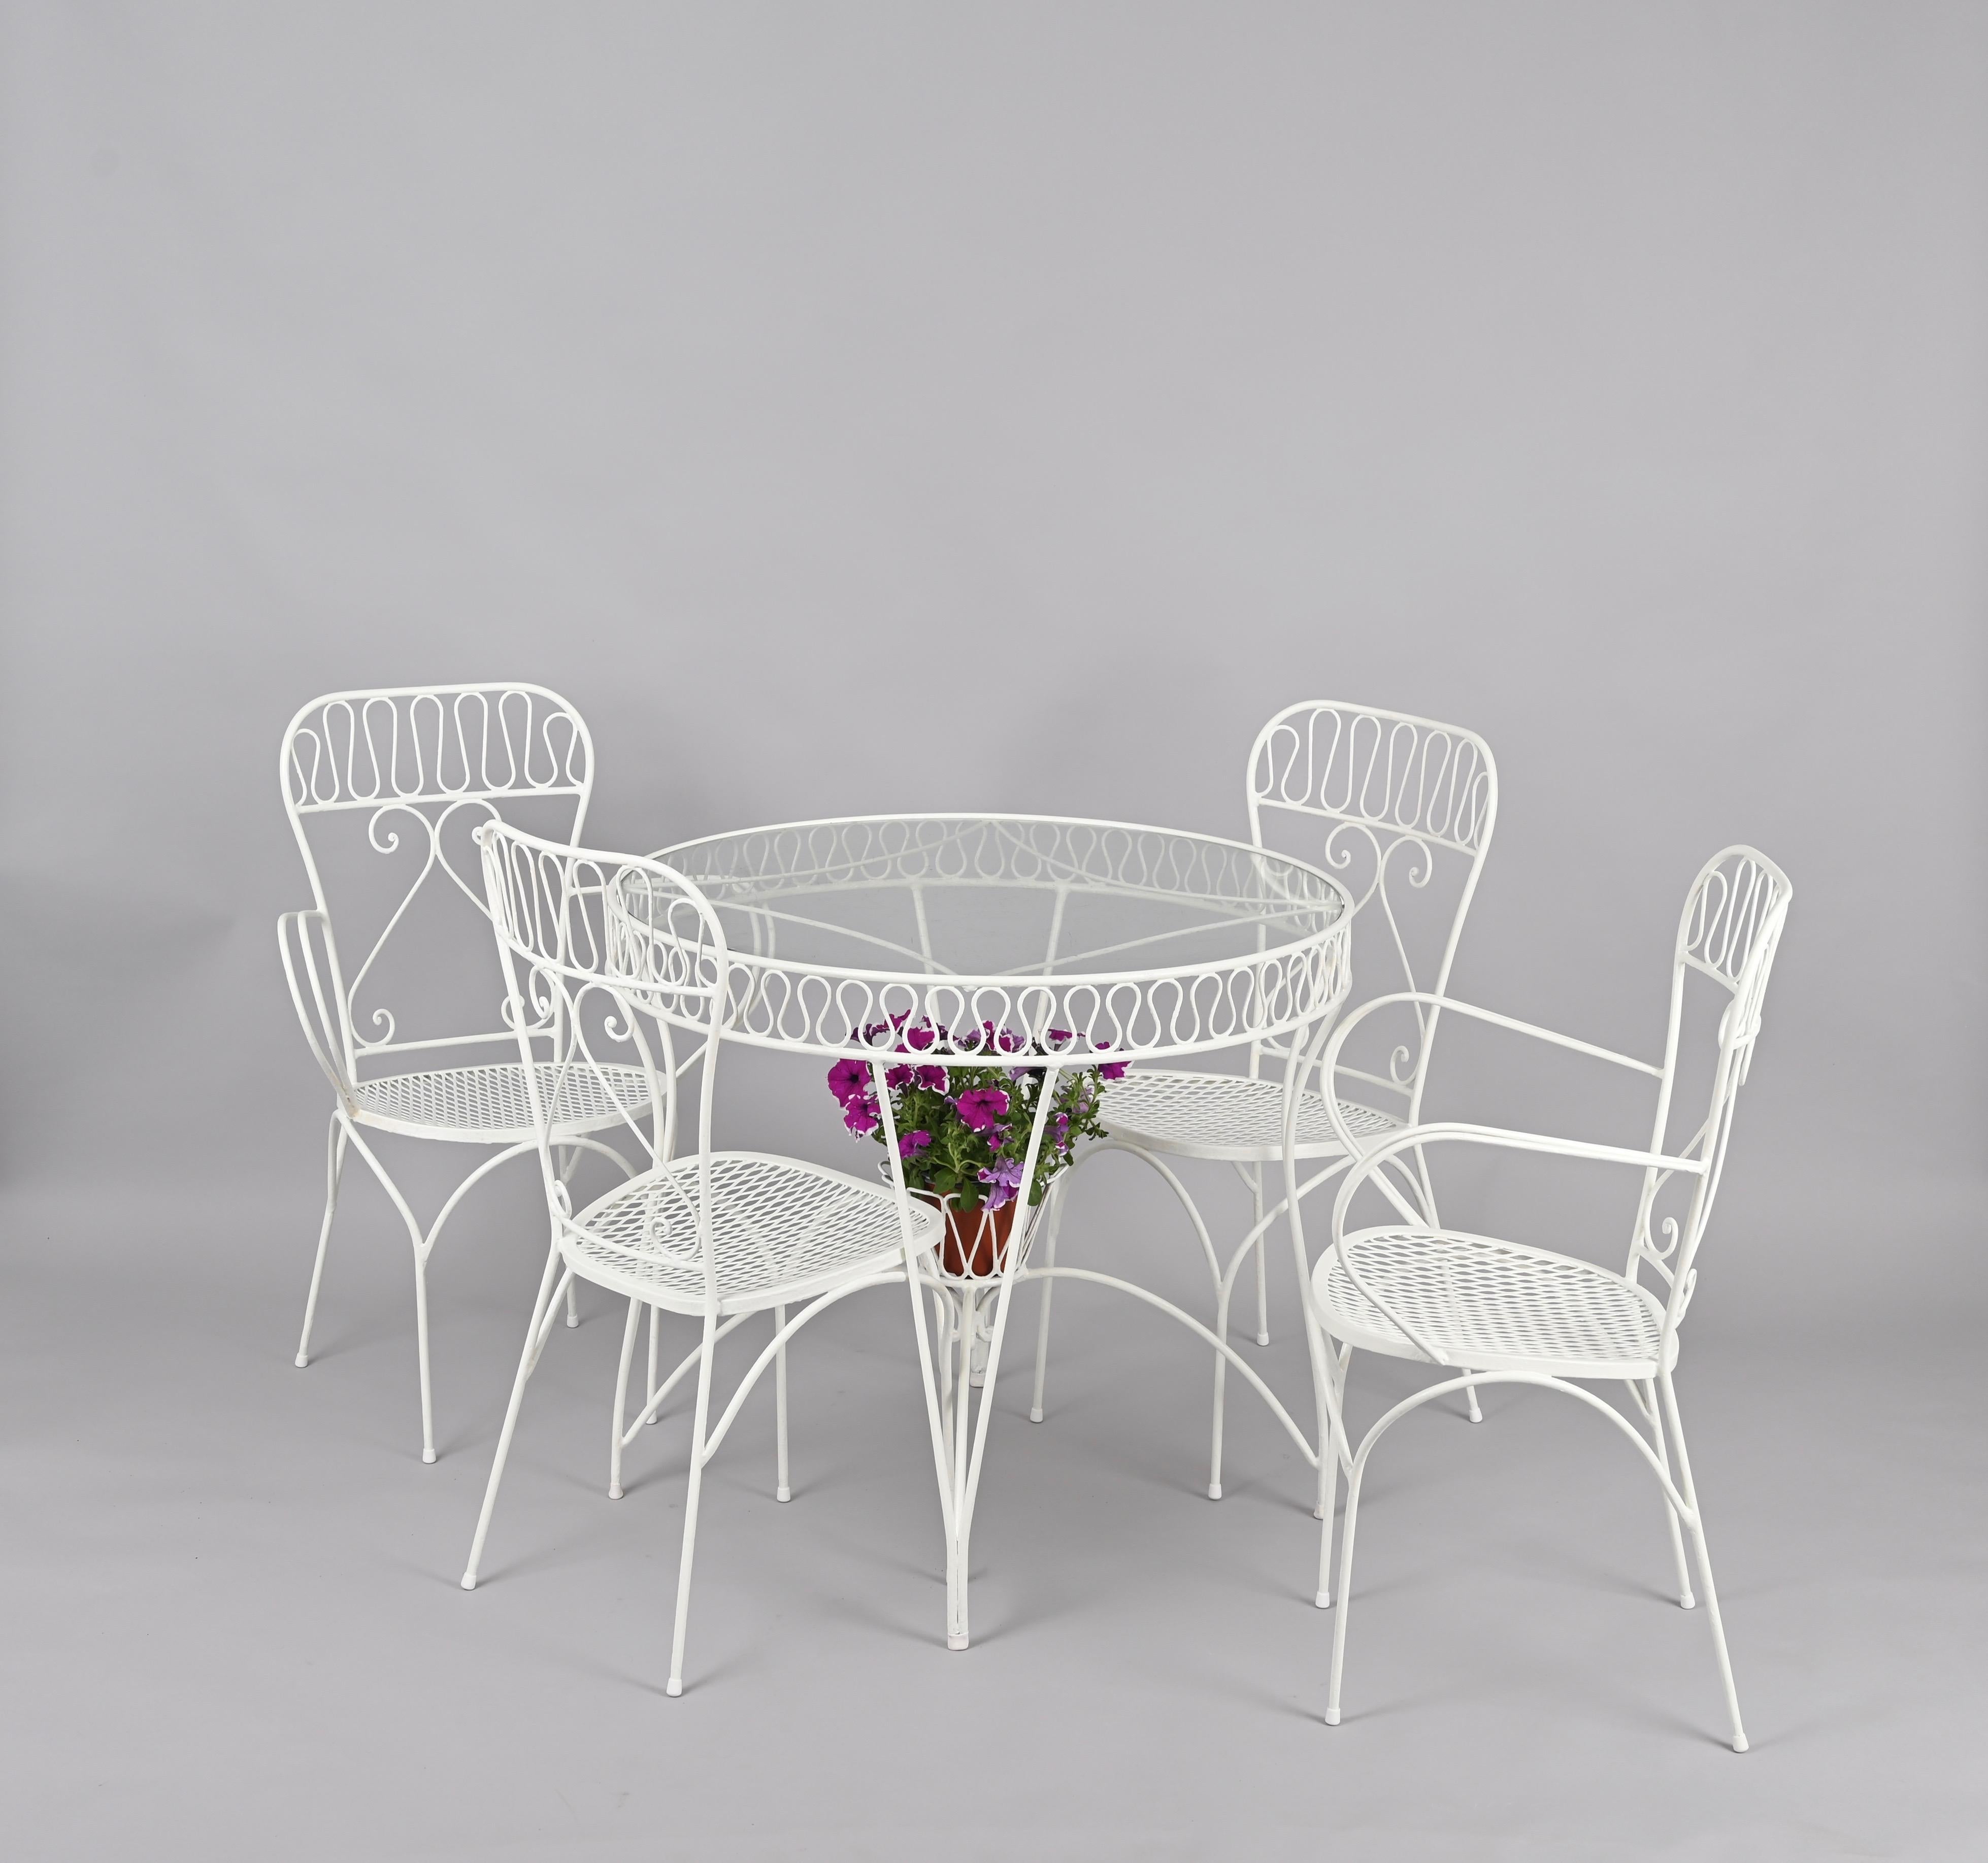 Mid-Century Italian Wrought Iron Set, 4 Chairs & Table w/ Plant Holder, 1950s For Sale 3